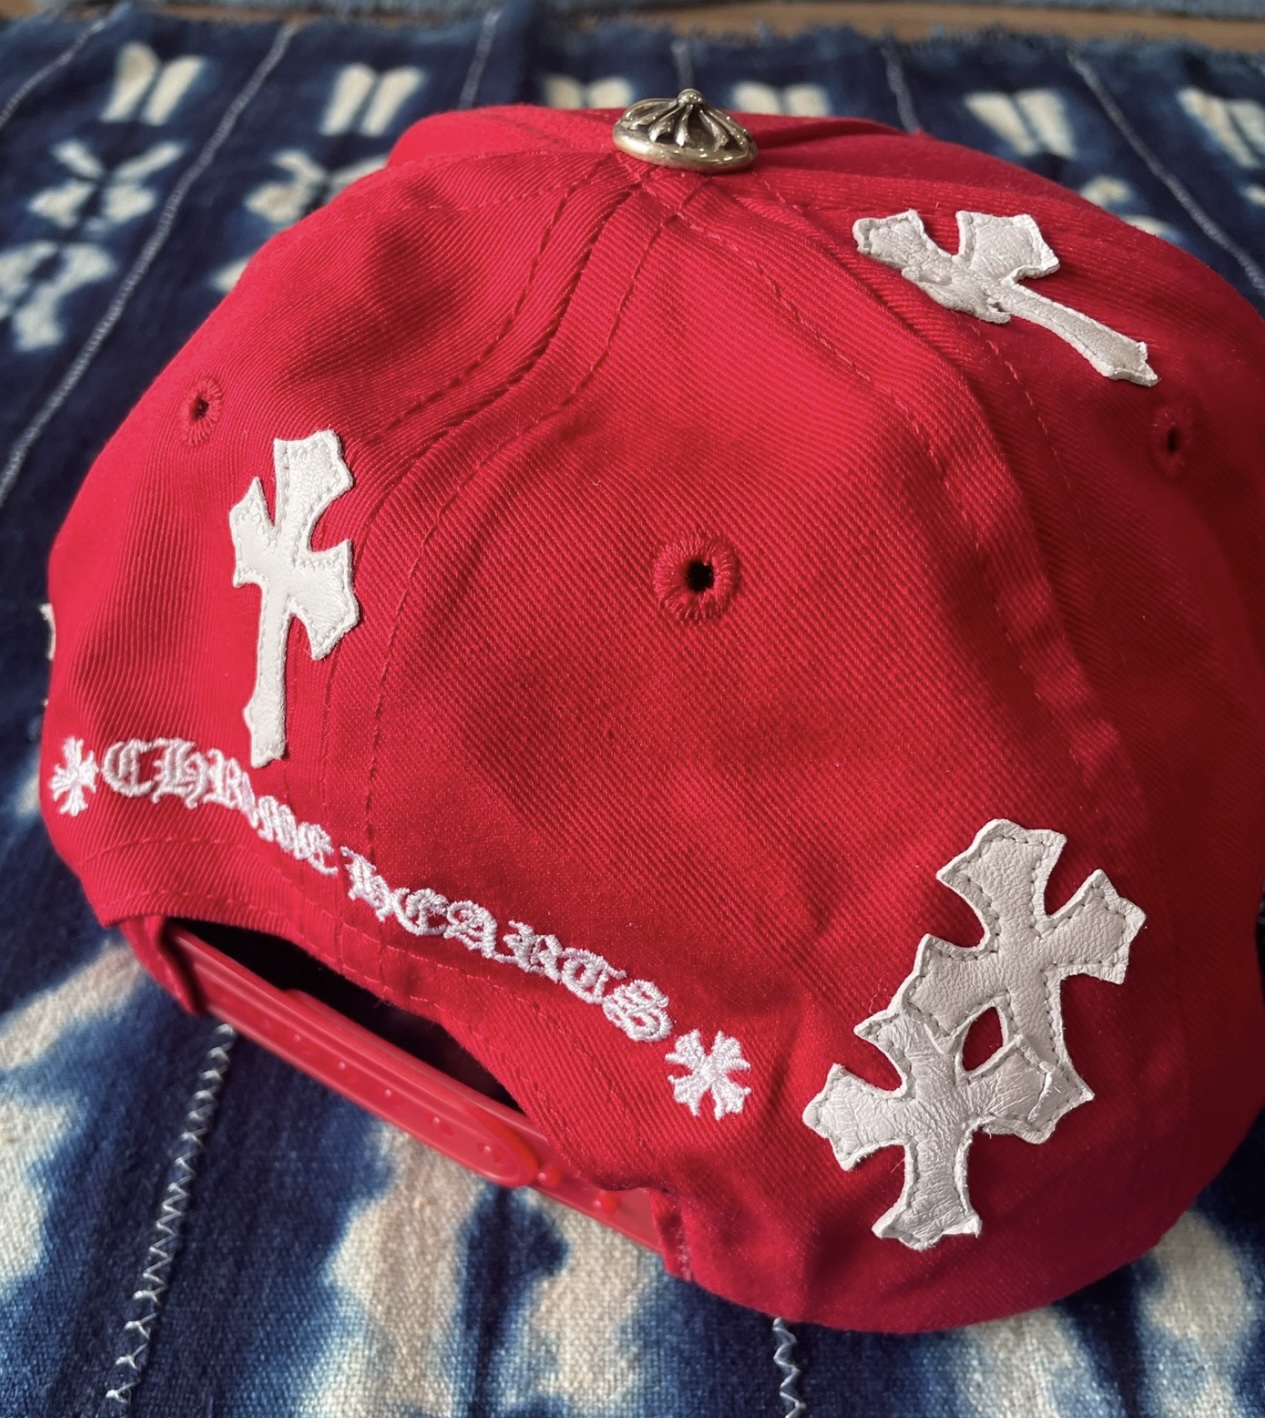 Chrome Hearts Red Cap with White Cross Patch - 5